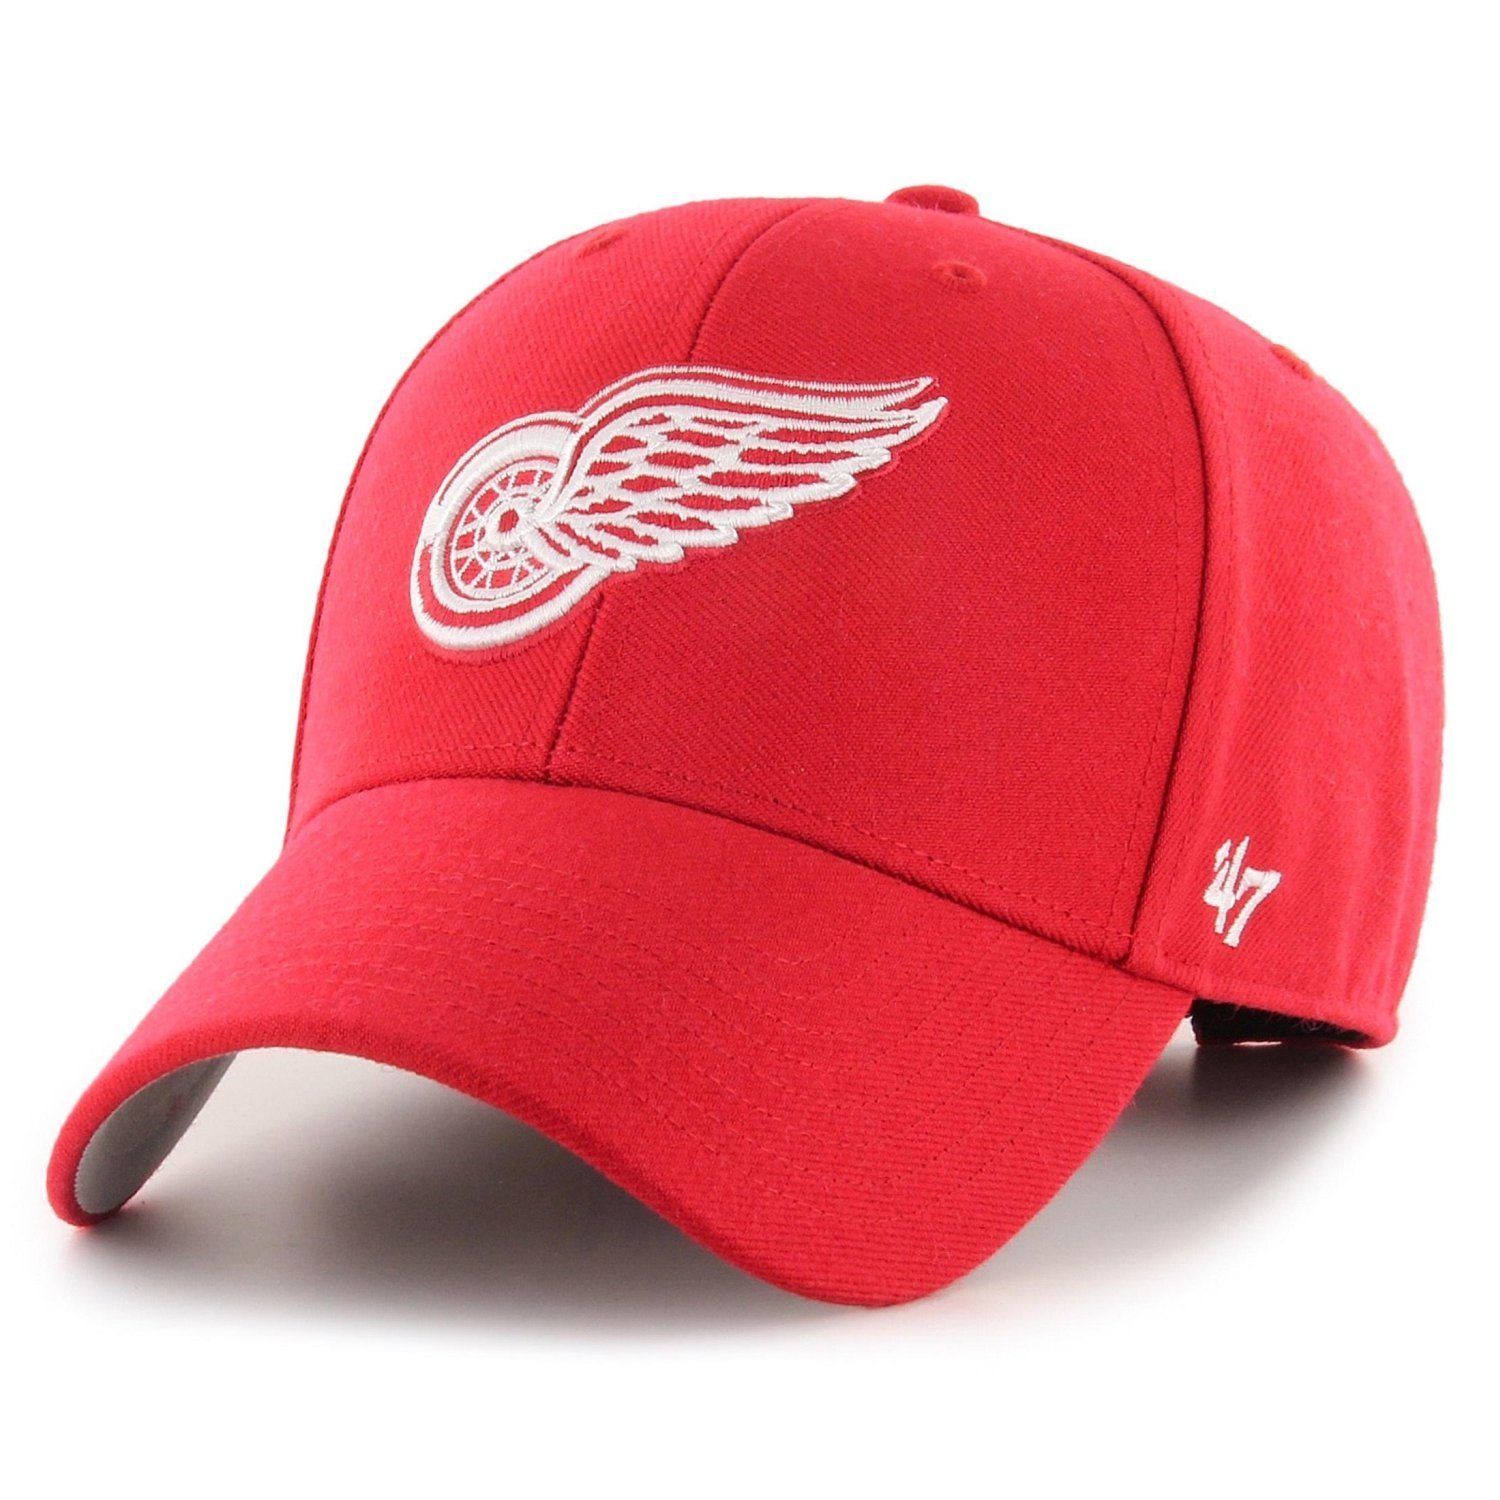 '47 Brand Trucker Cap Relaxed Fit NHL Detroit Red Wings